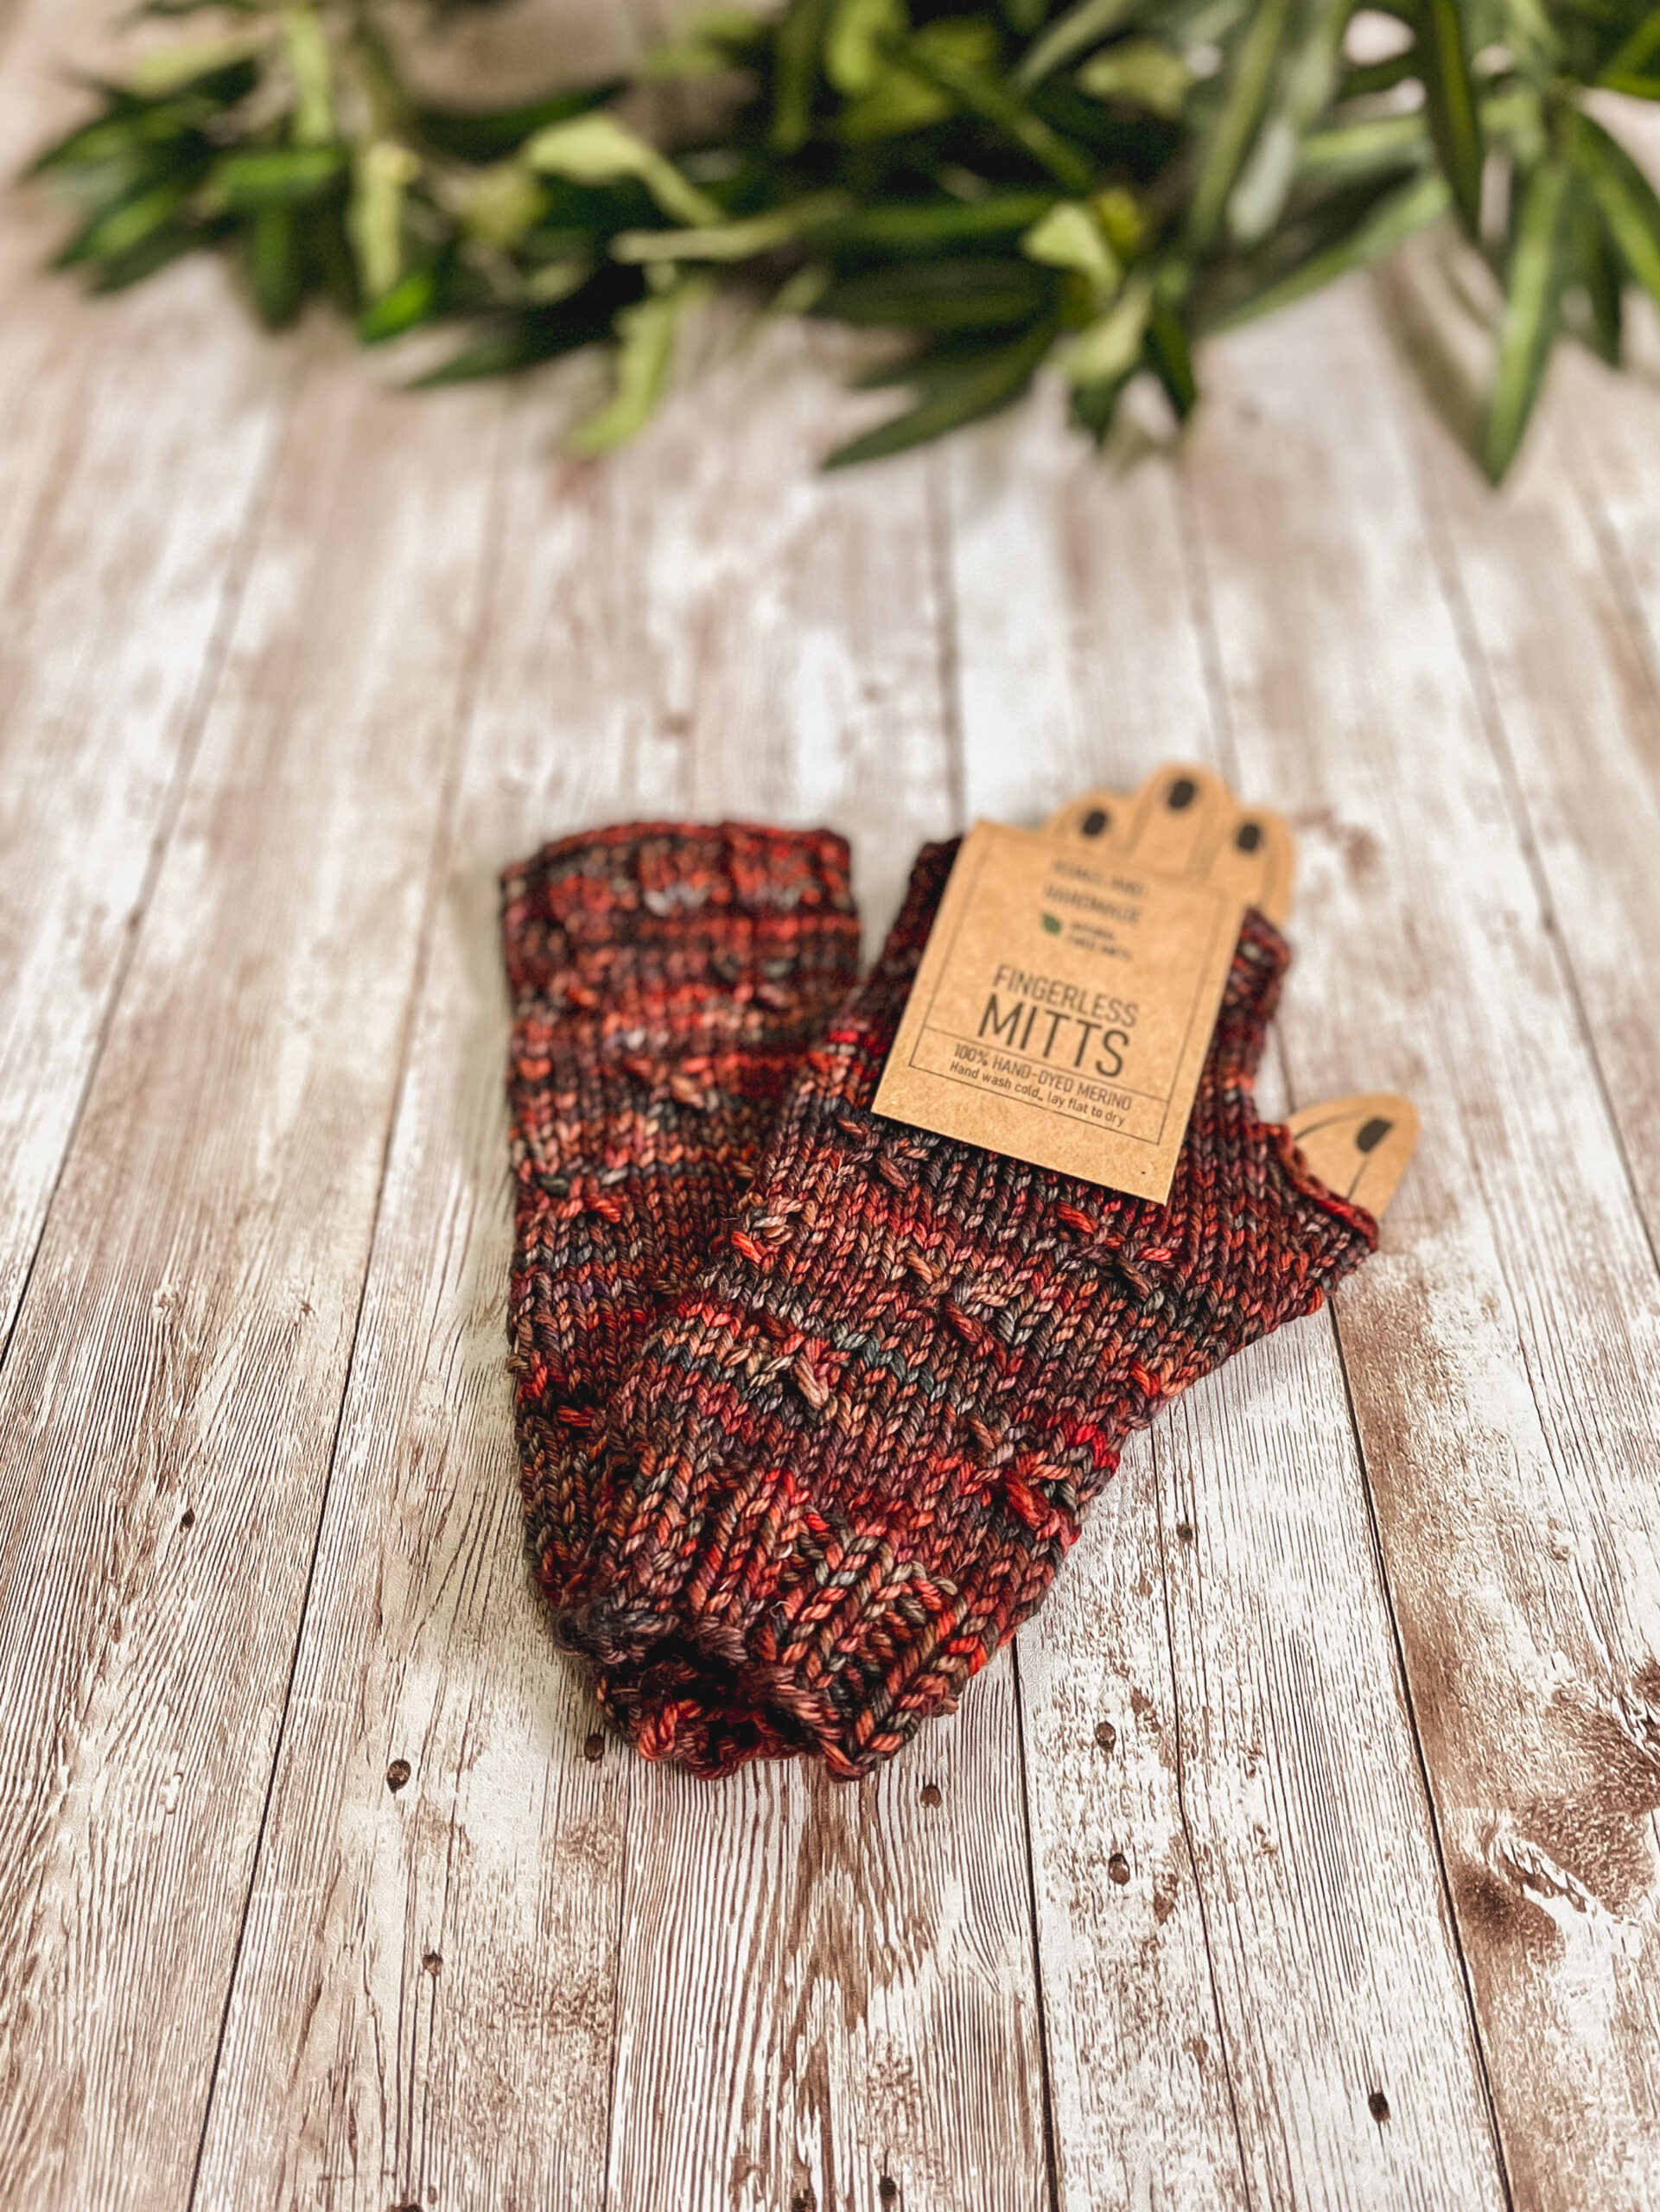 A pair of fingerless mitts in an autumn mix of colors lays on a wood panel with greenery in the background